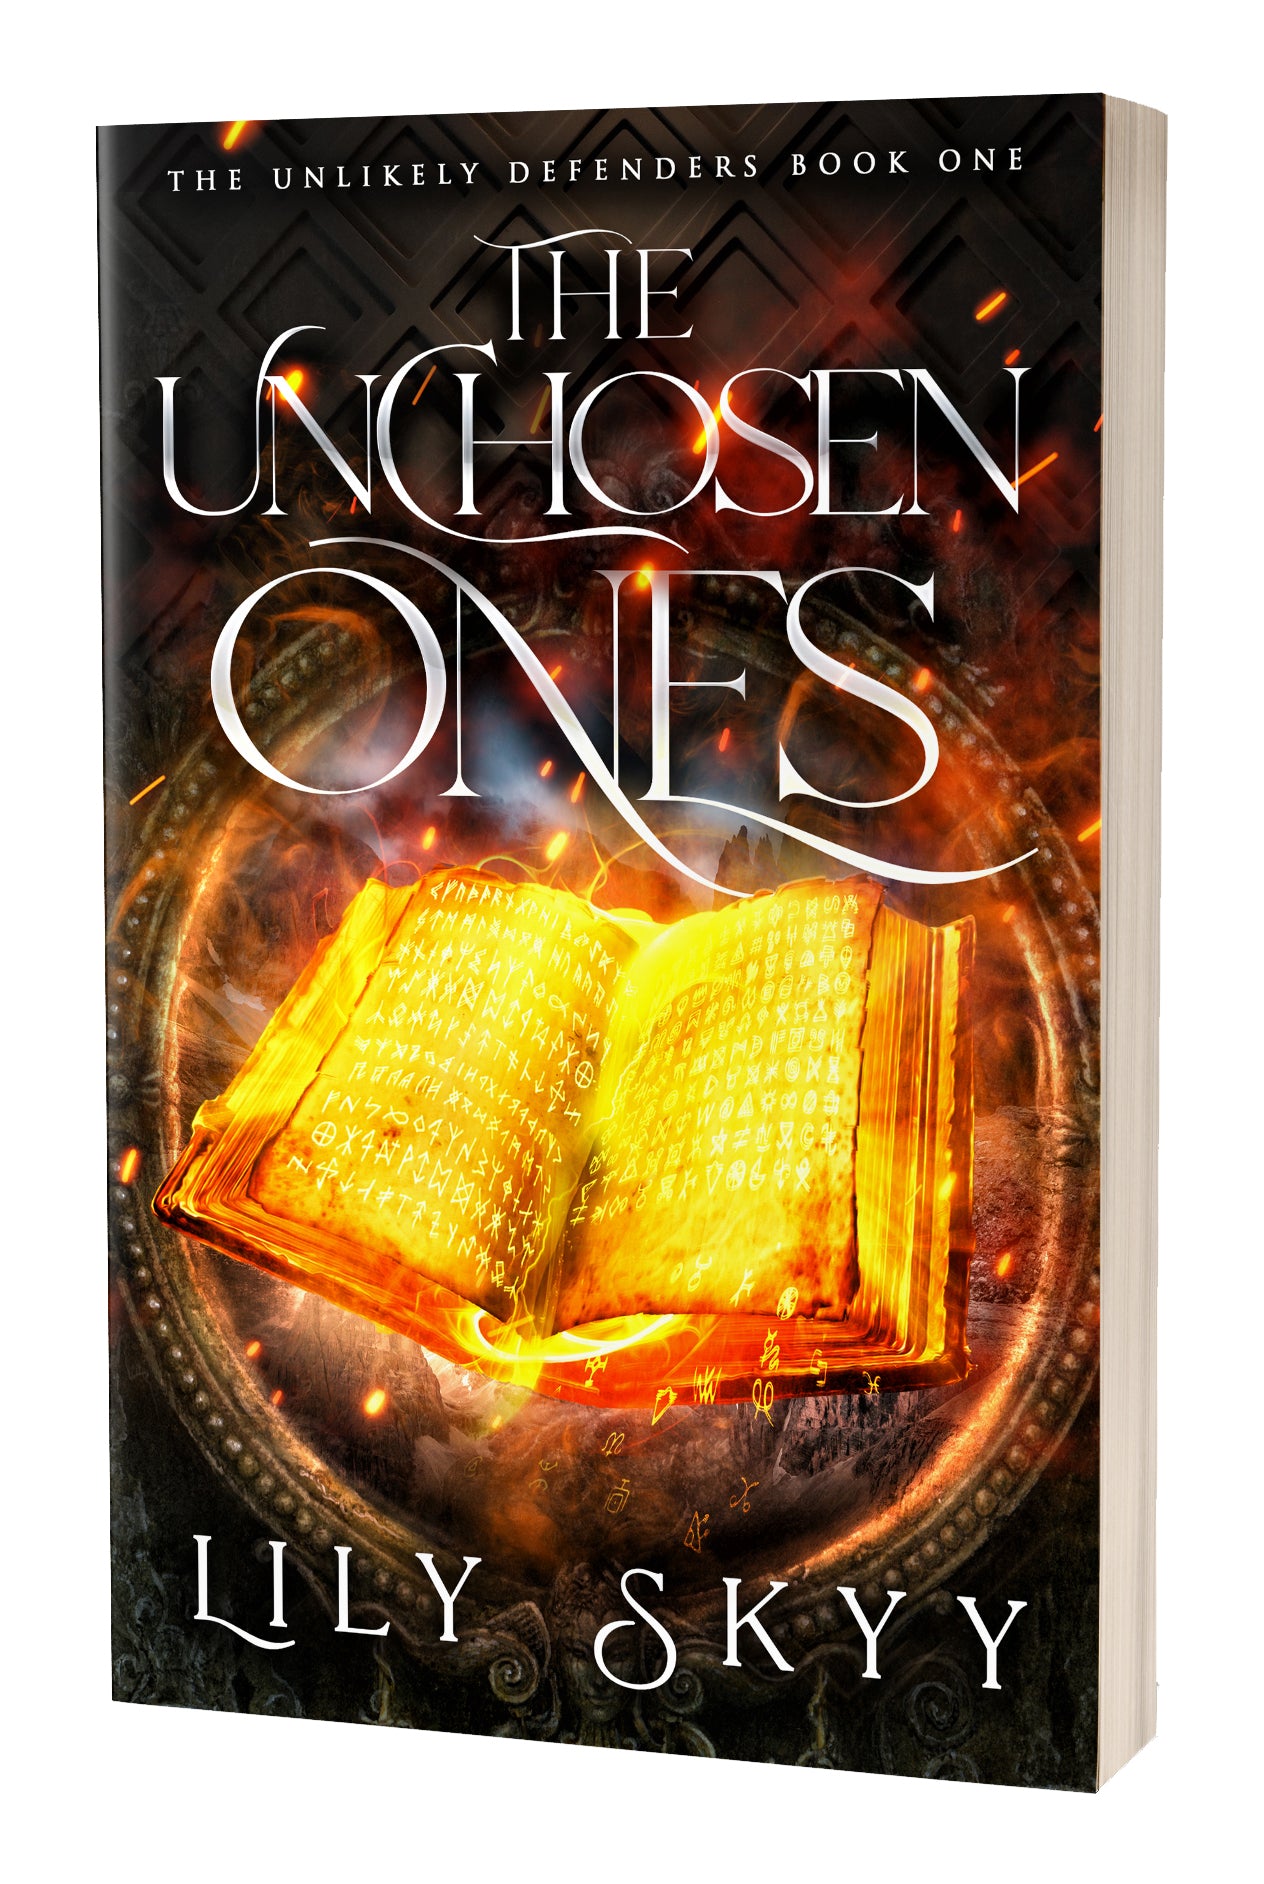 The Unchosen Ones: The Unlikely Defenders Book 1 (paperback)